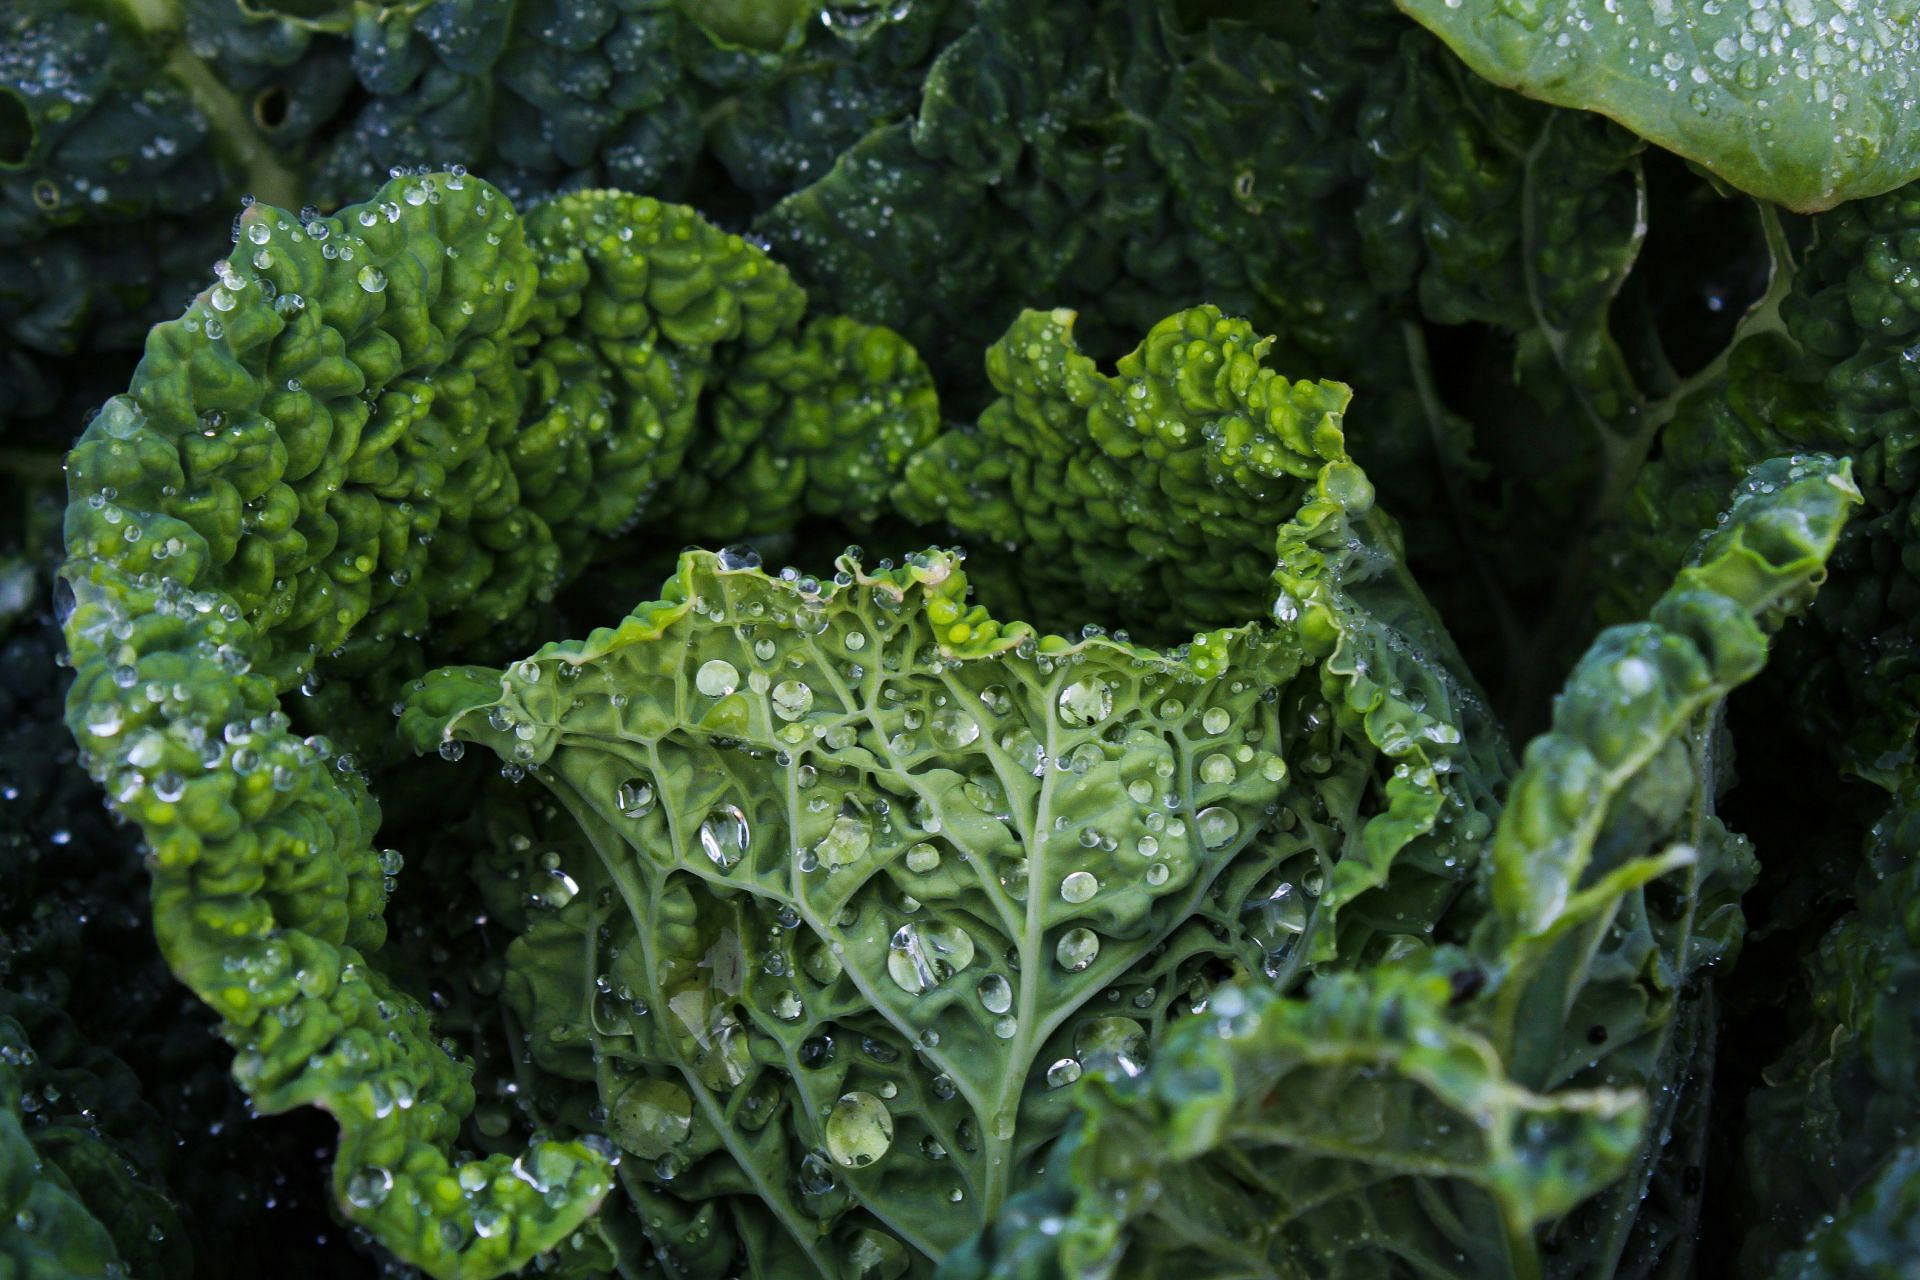 Sulforaphane is found in kale and other leafy greens (Image by Kiona/Unsplash)